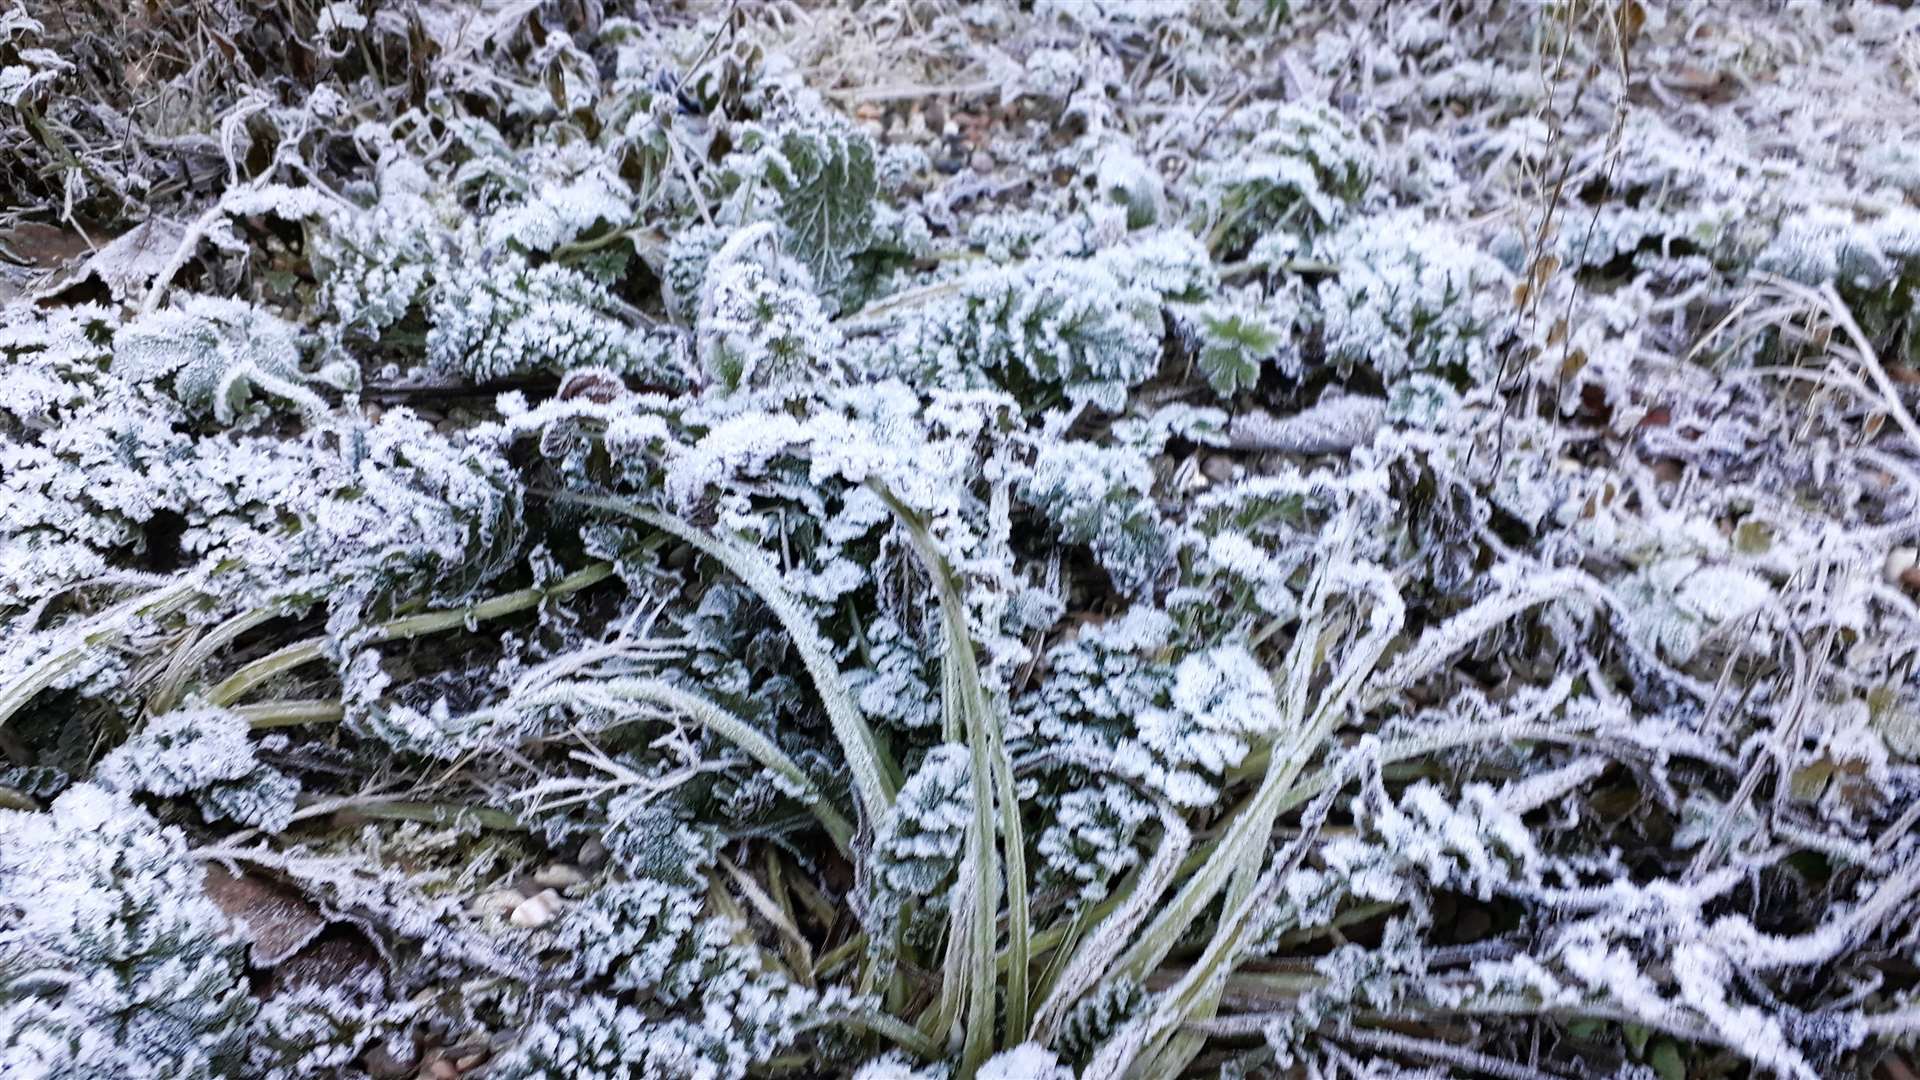 Picture of hoar frost on vegetation sent in by Wick's weather watcher Keith Banks.